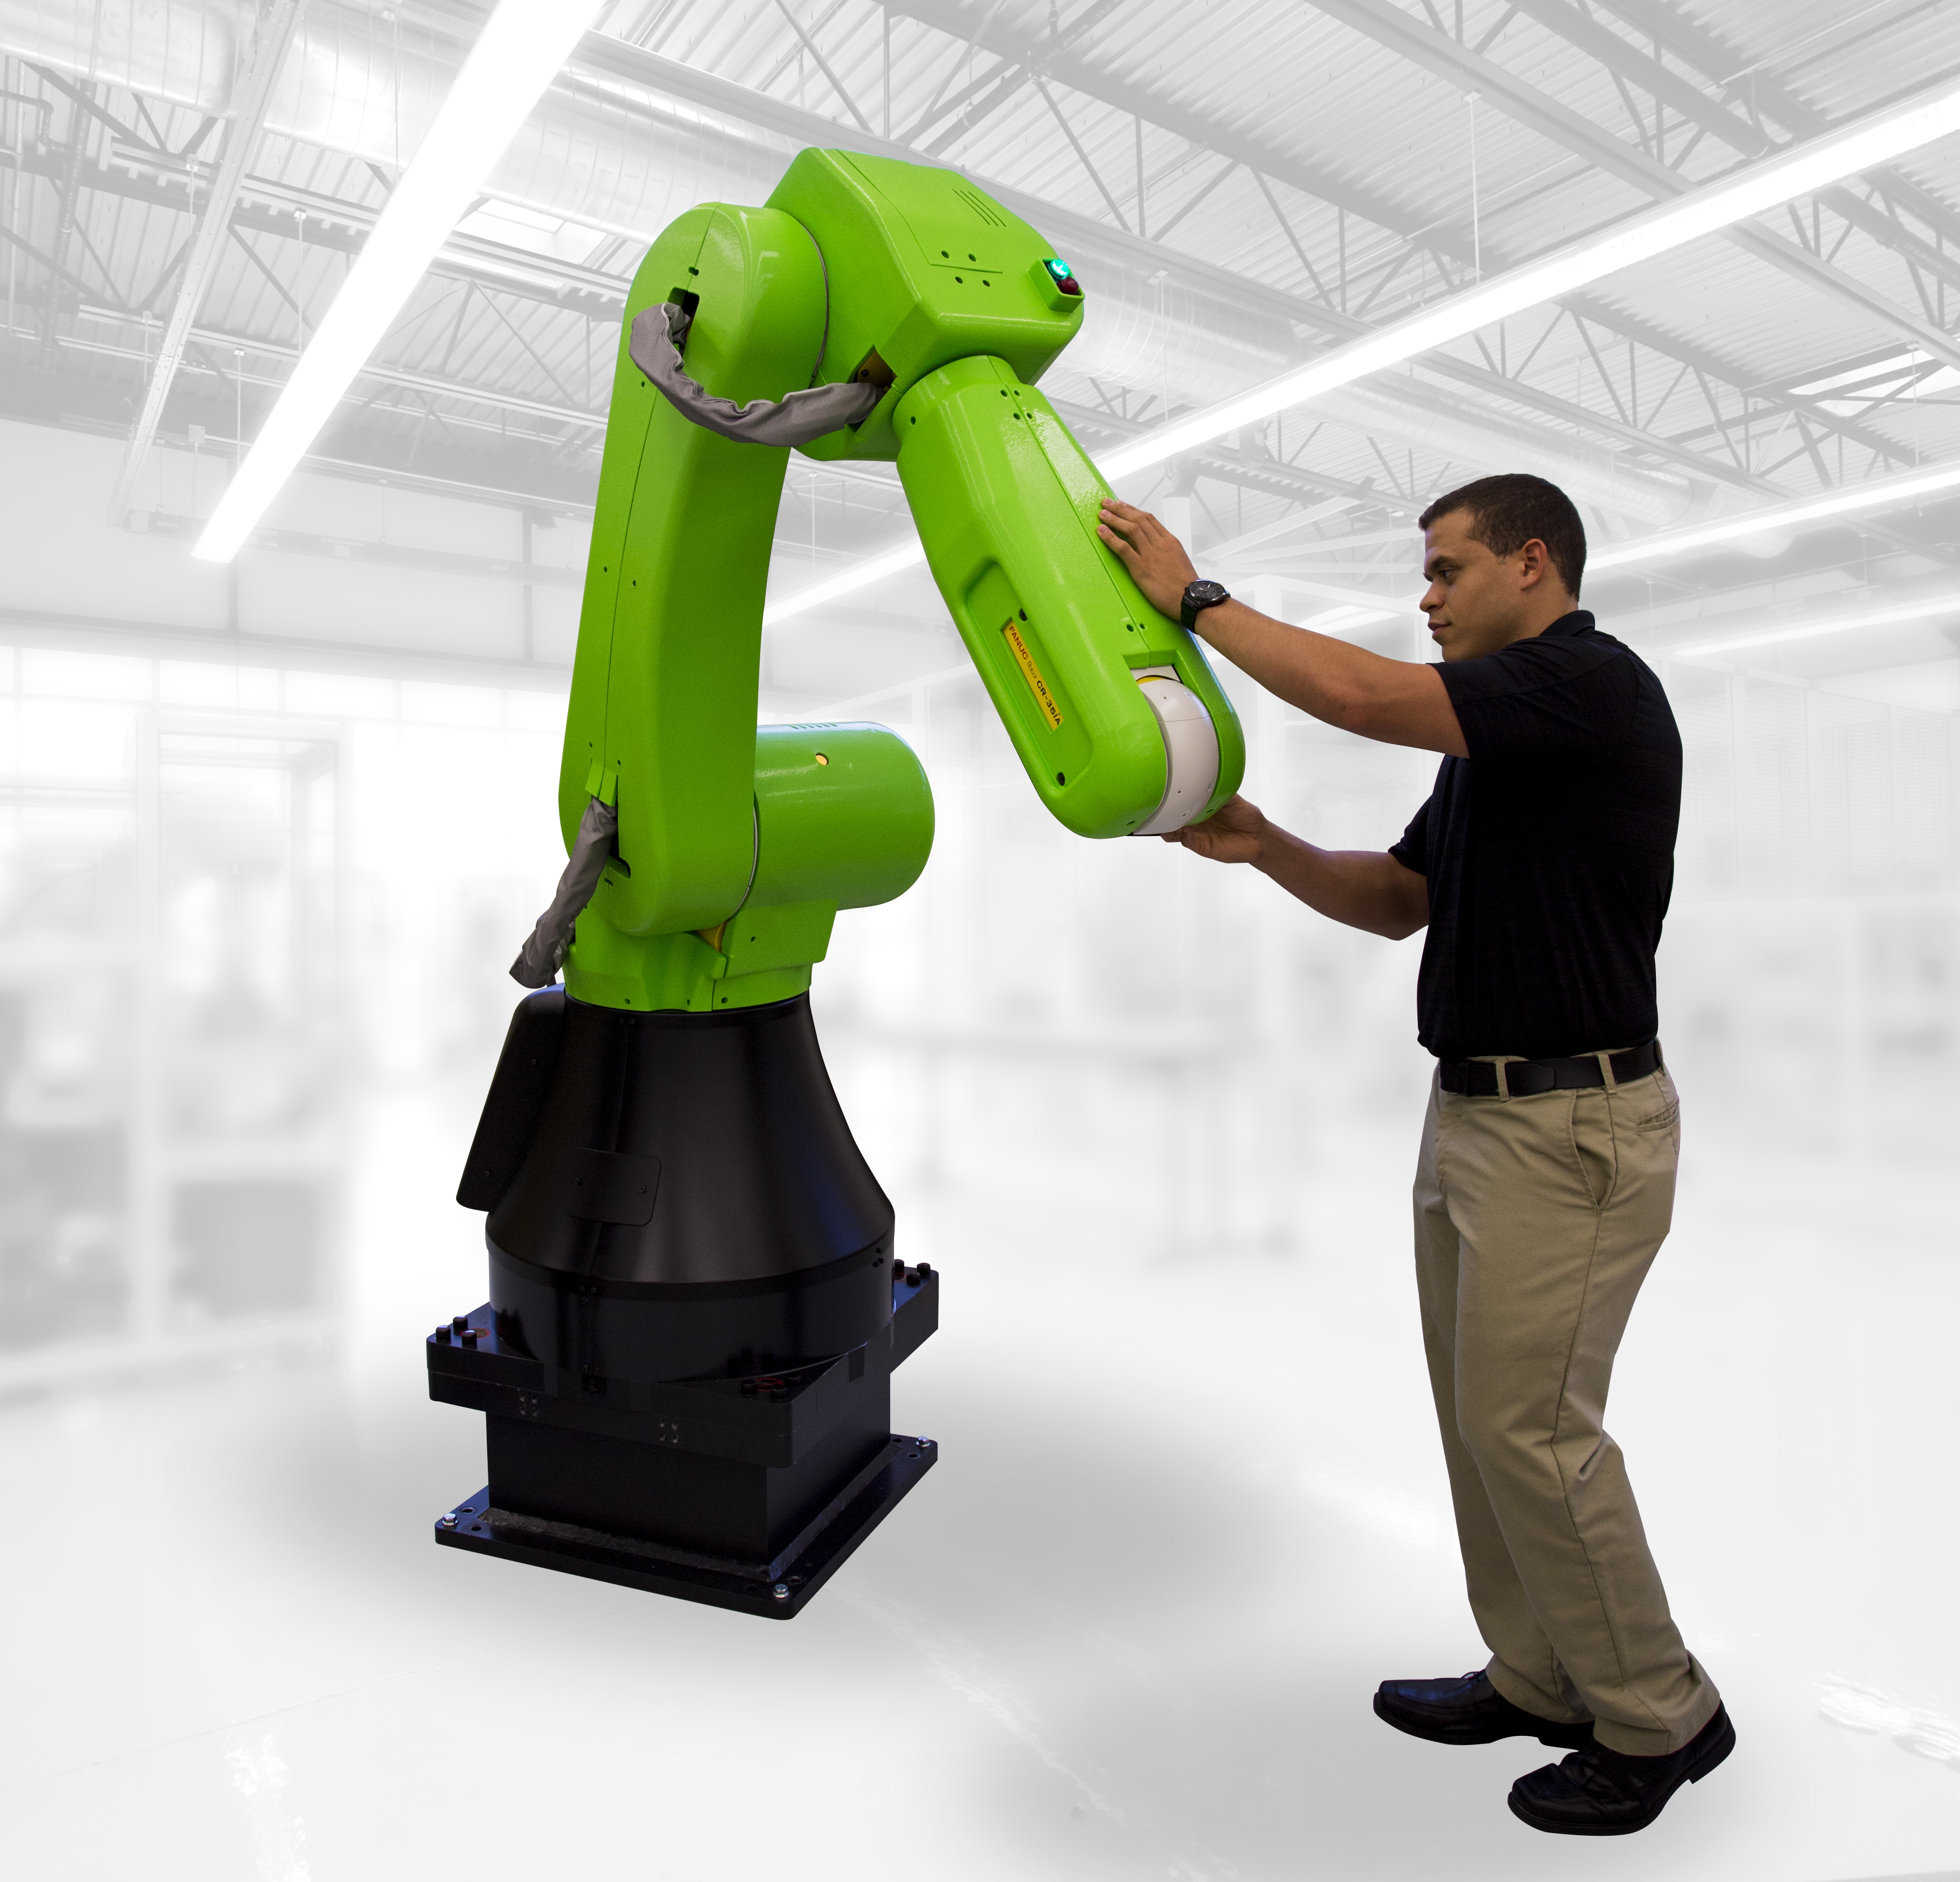 FANUC America Introduces New CR-35iA Collaborative Robot Designed Work Alongside Humans | Business Wire